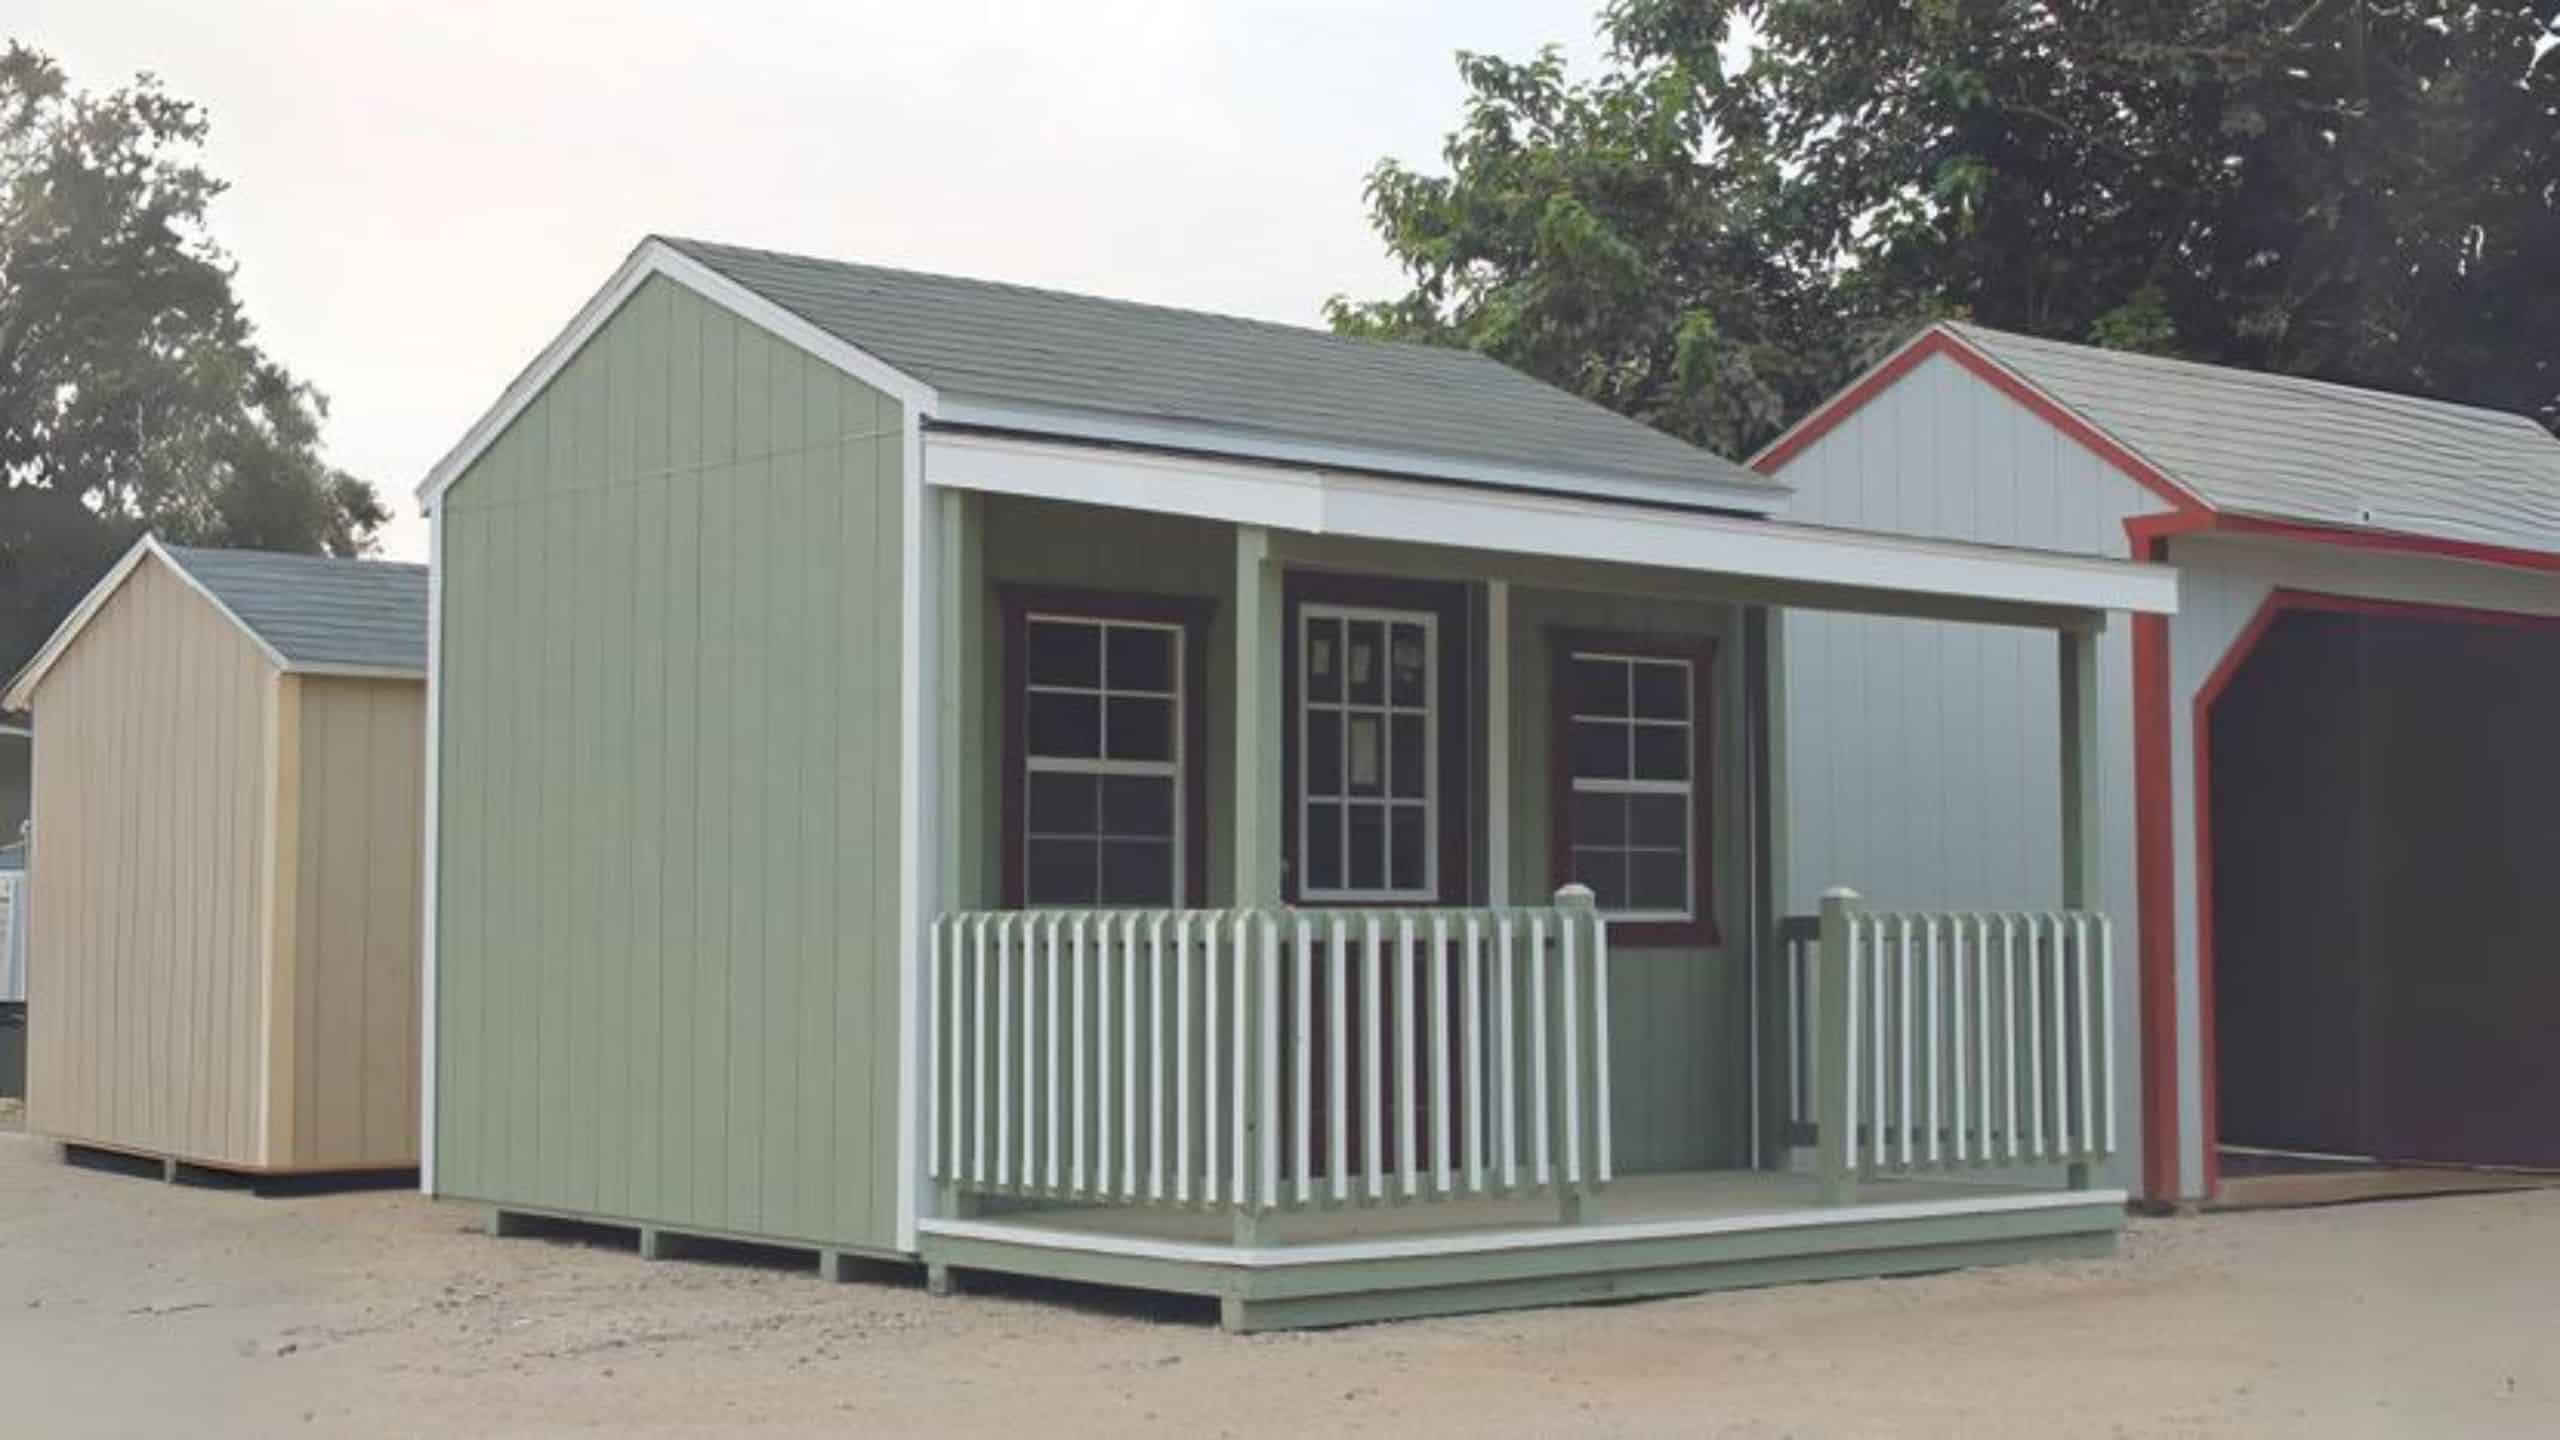 Teal cottage shed with porch